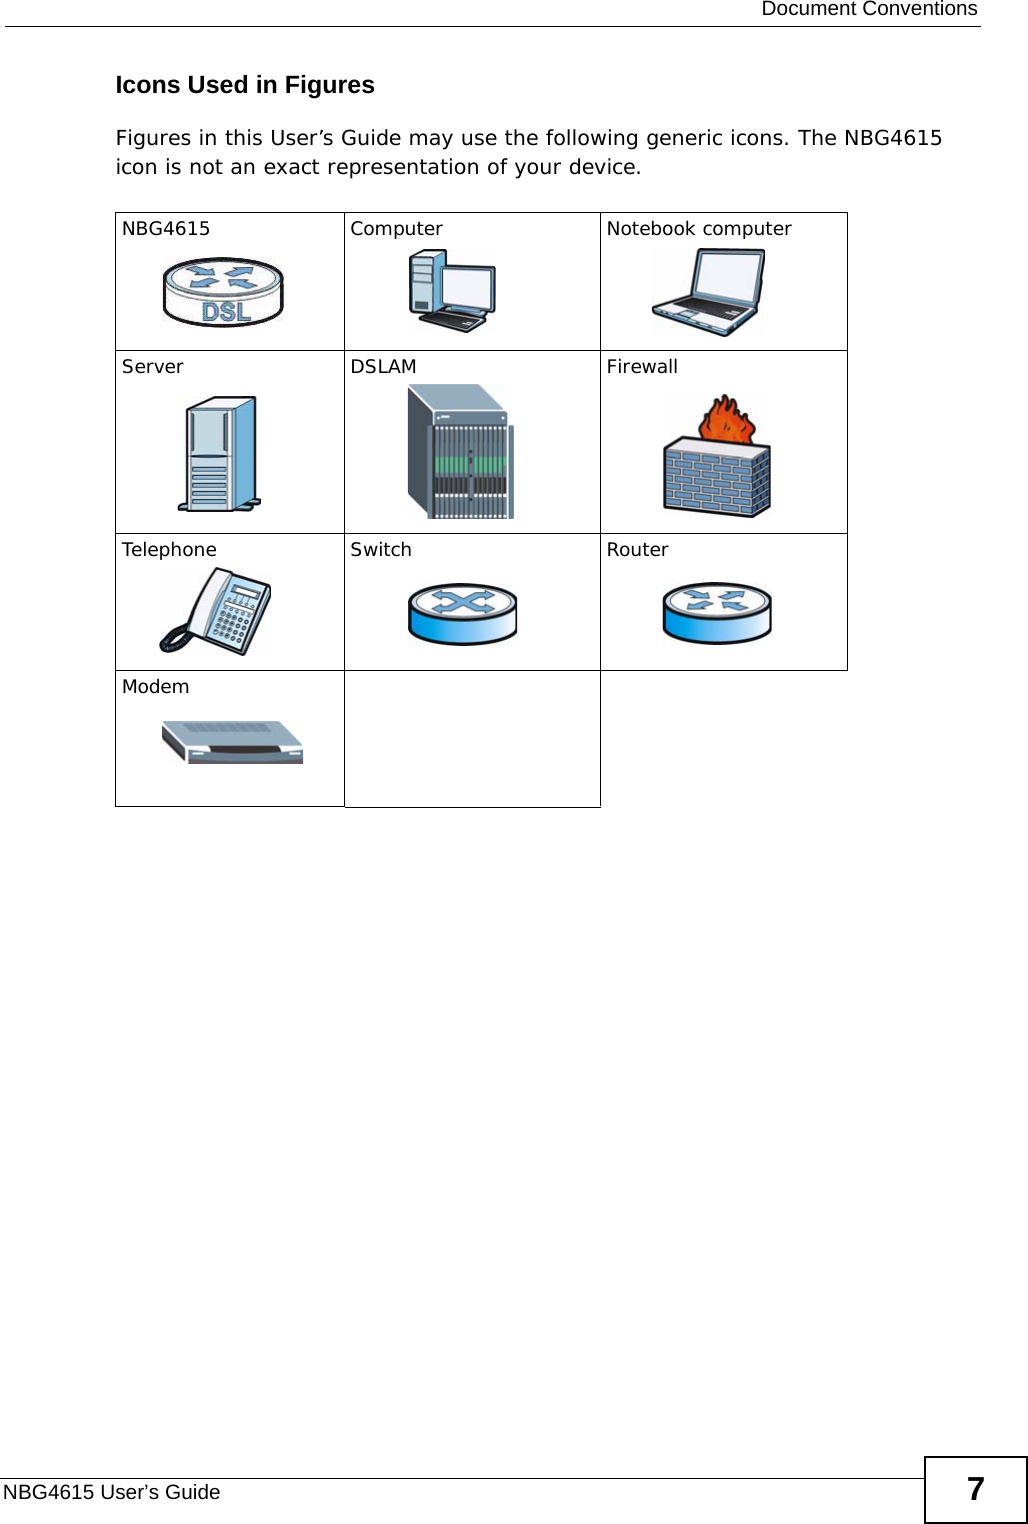  Document ConventionsNBG4615 User’s Guide 7Icons Used in FiguresFigures in this User’s Guide may use the following generic icons. The NBG4615 icon is not an exact representation of your device.NBG4615 Computer Notebook computerServer DSLAM FirewallTelephone Switch RouterModem